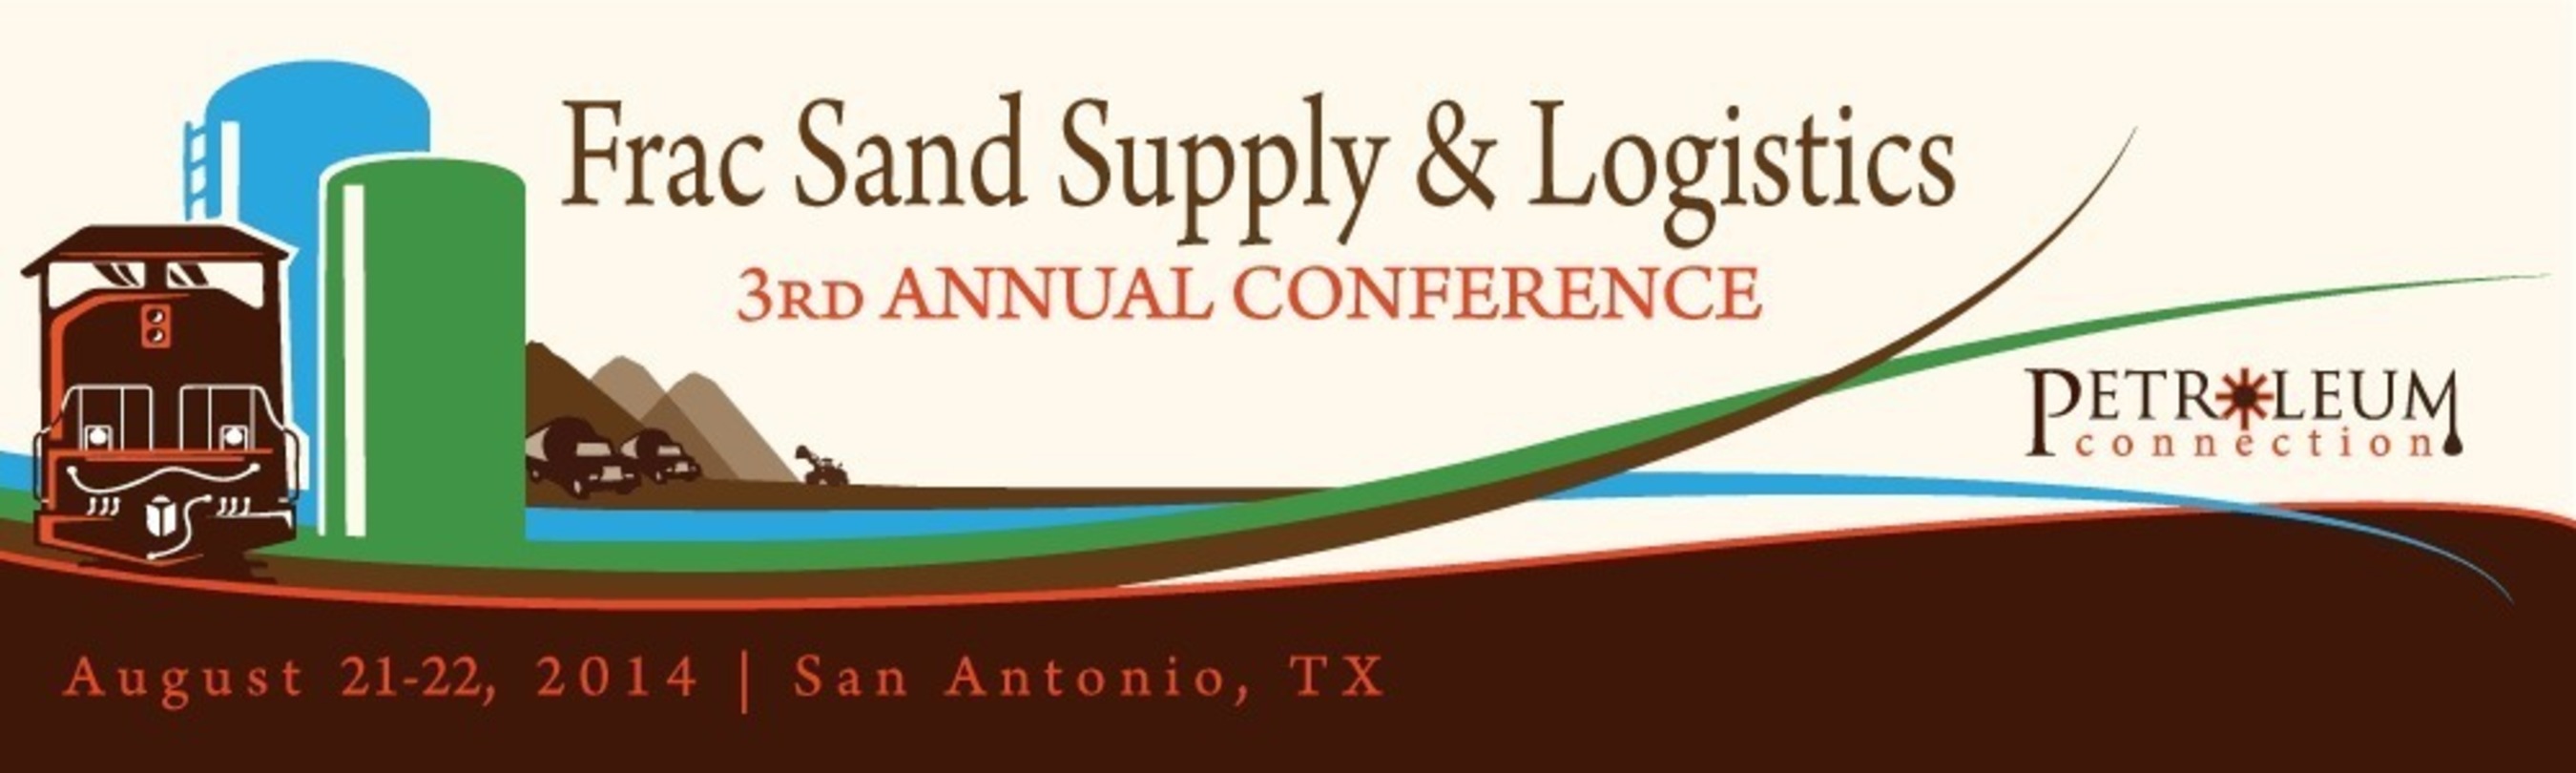 The 3rd Annual Frac Sand Supply & Logistics Conference
 (PRNewsFoto/The Petroleum Connection)